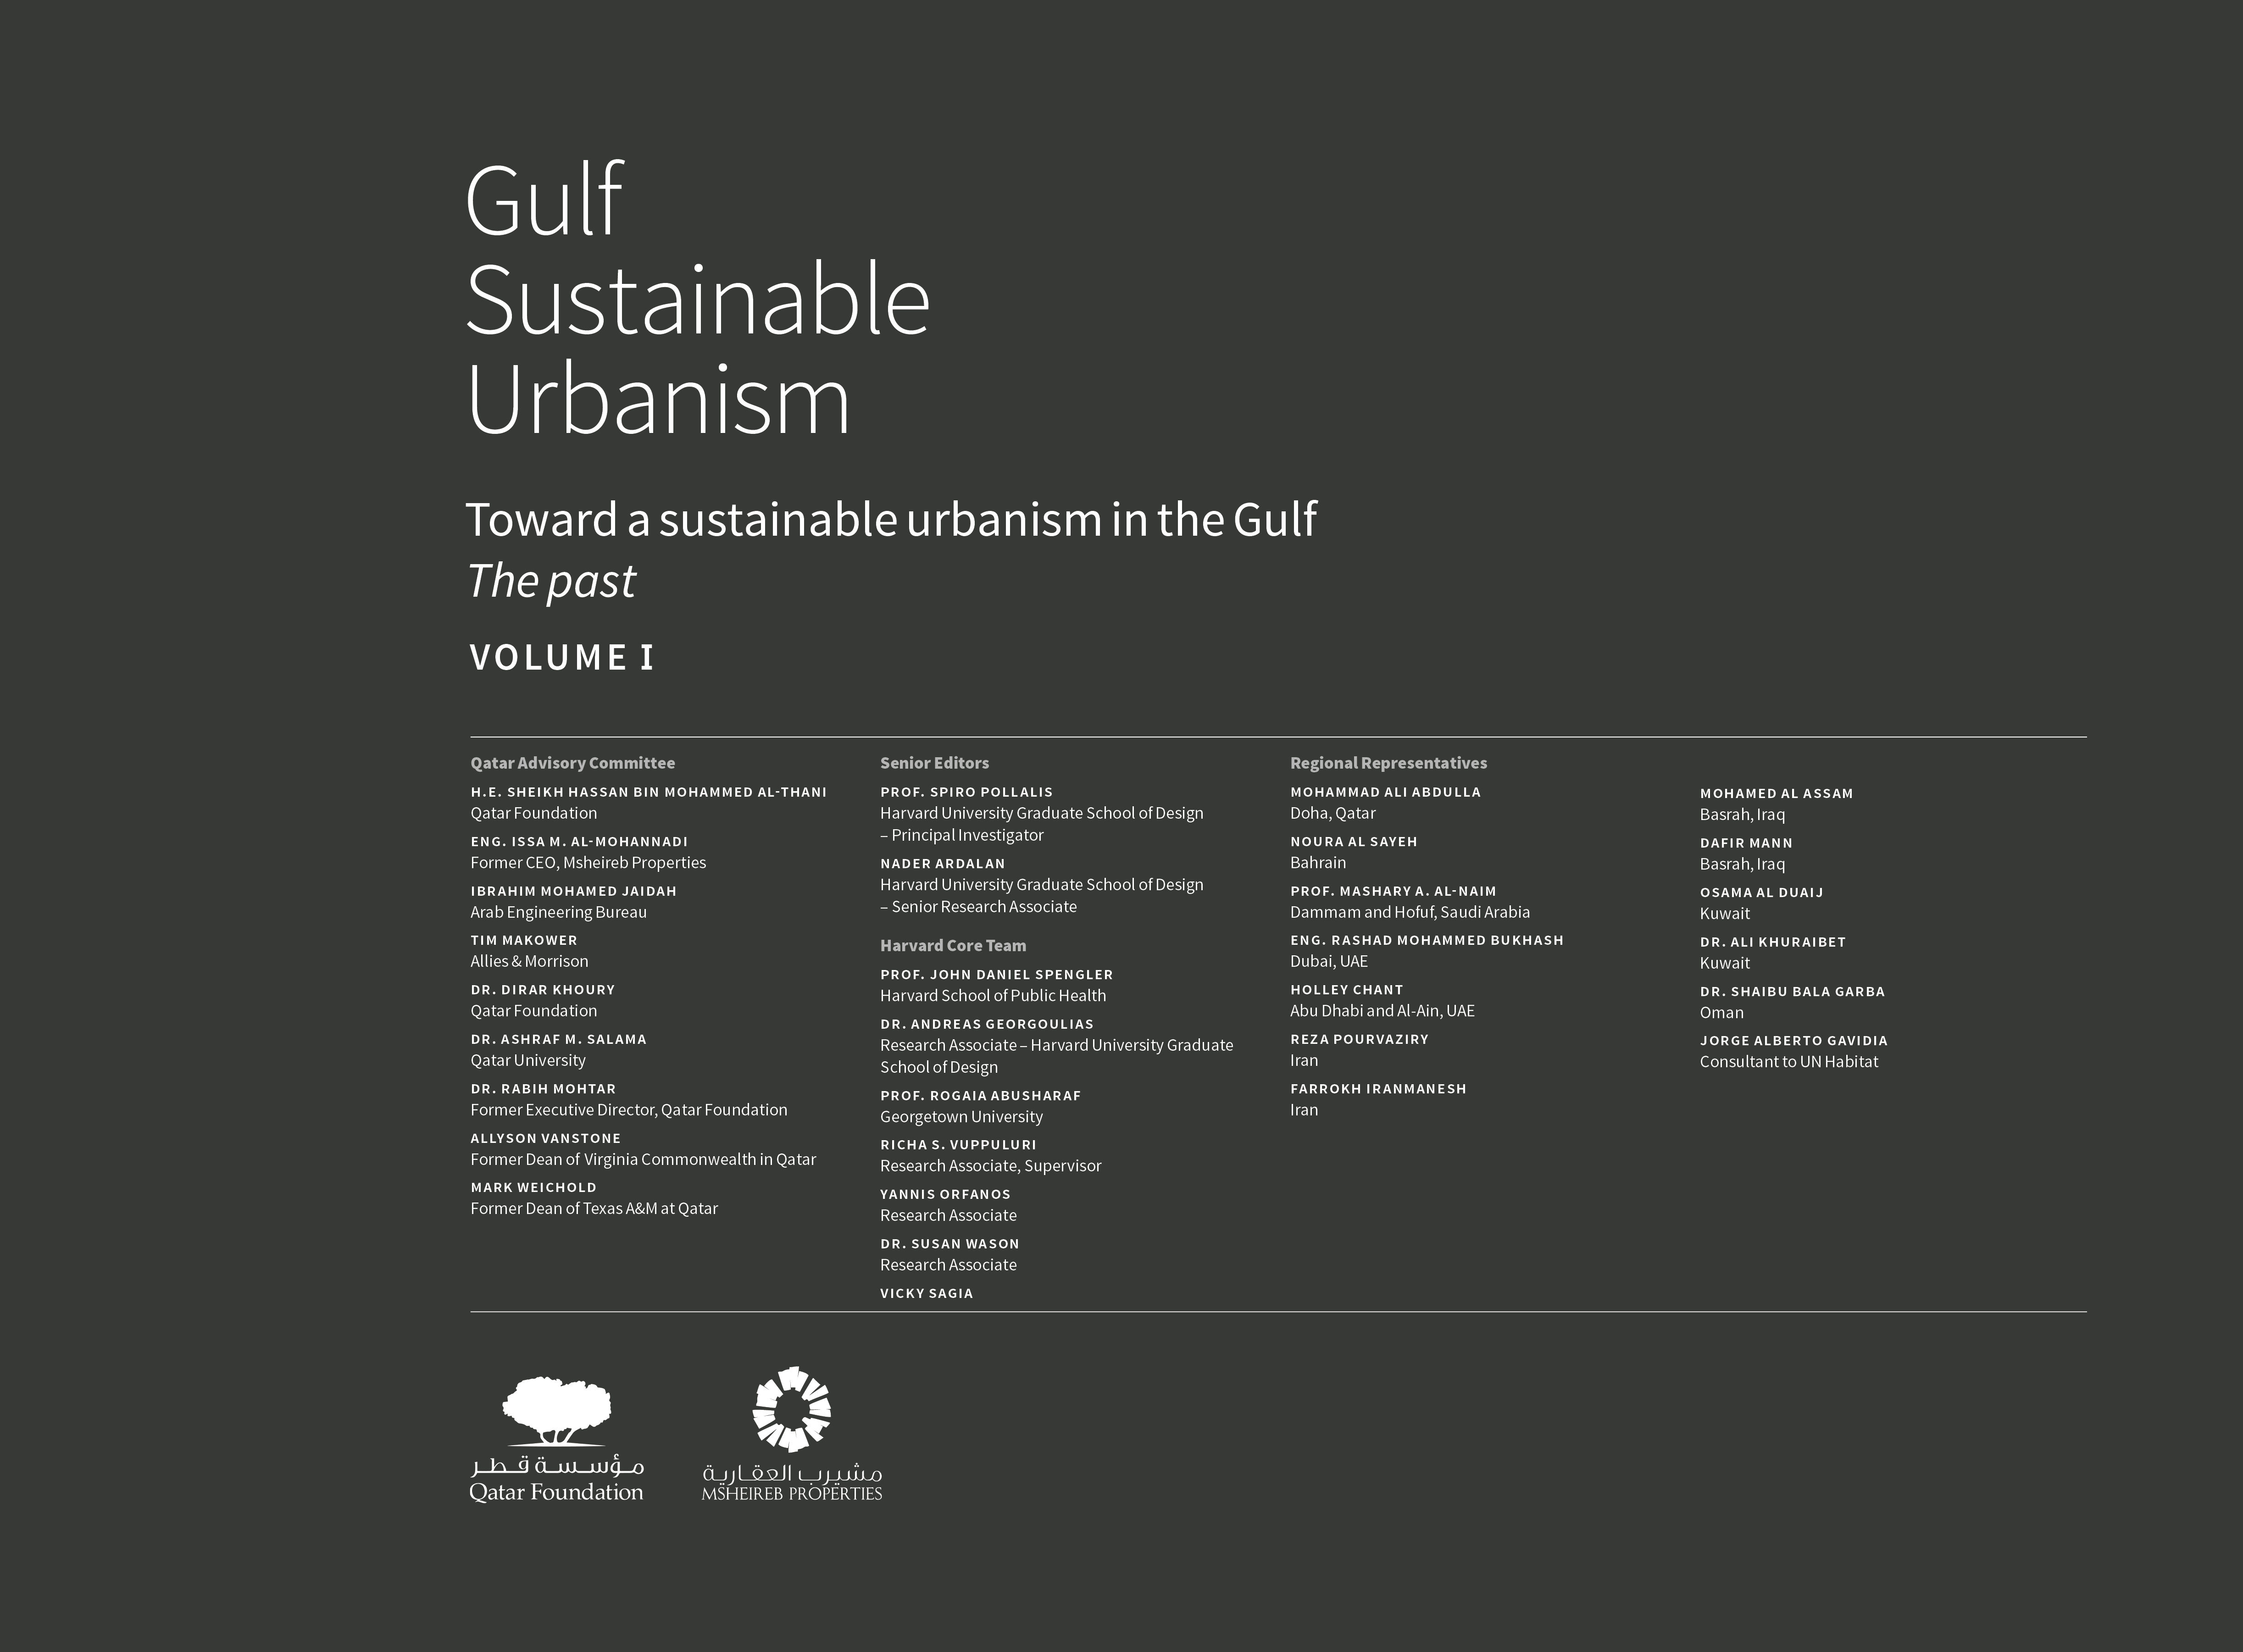 image of Foreword by Her Highness Sheikha Moza bint Nasser, Chairperson of Qatar Foundation